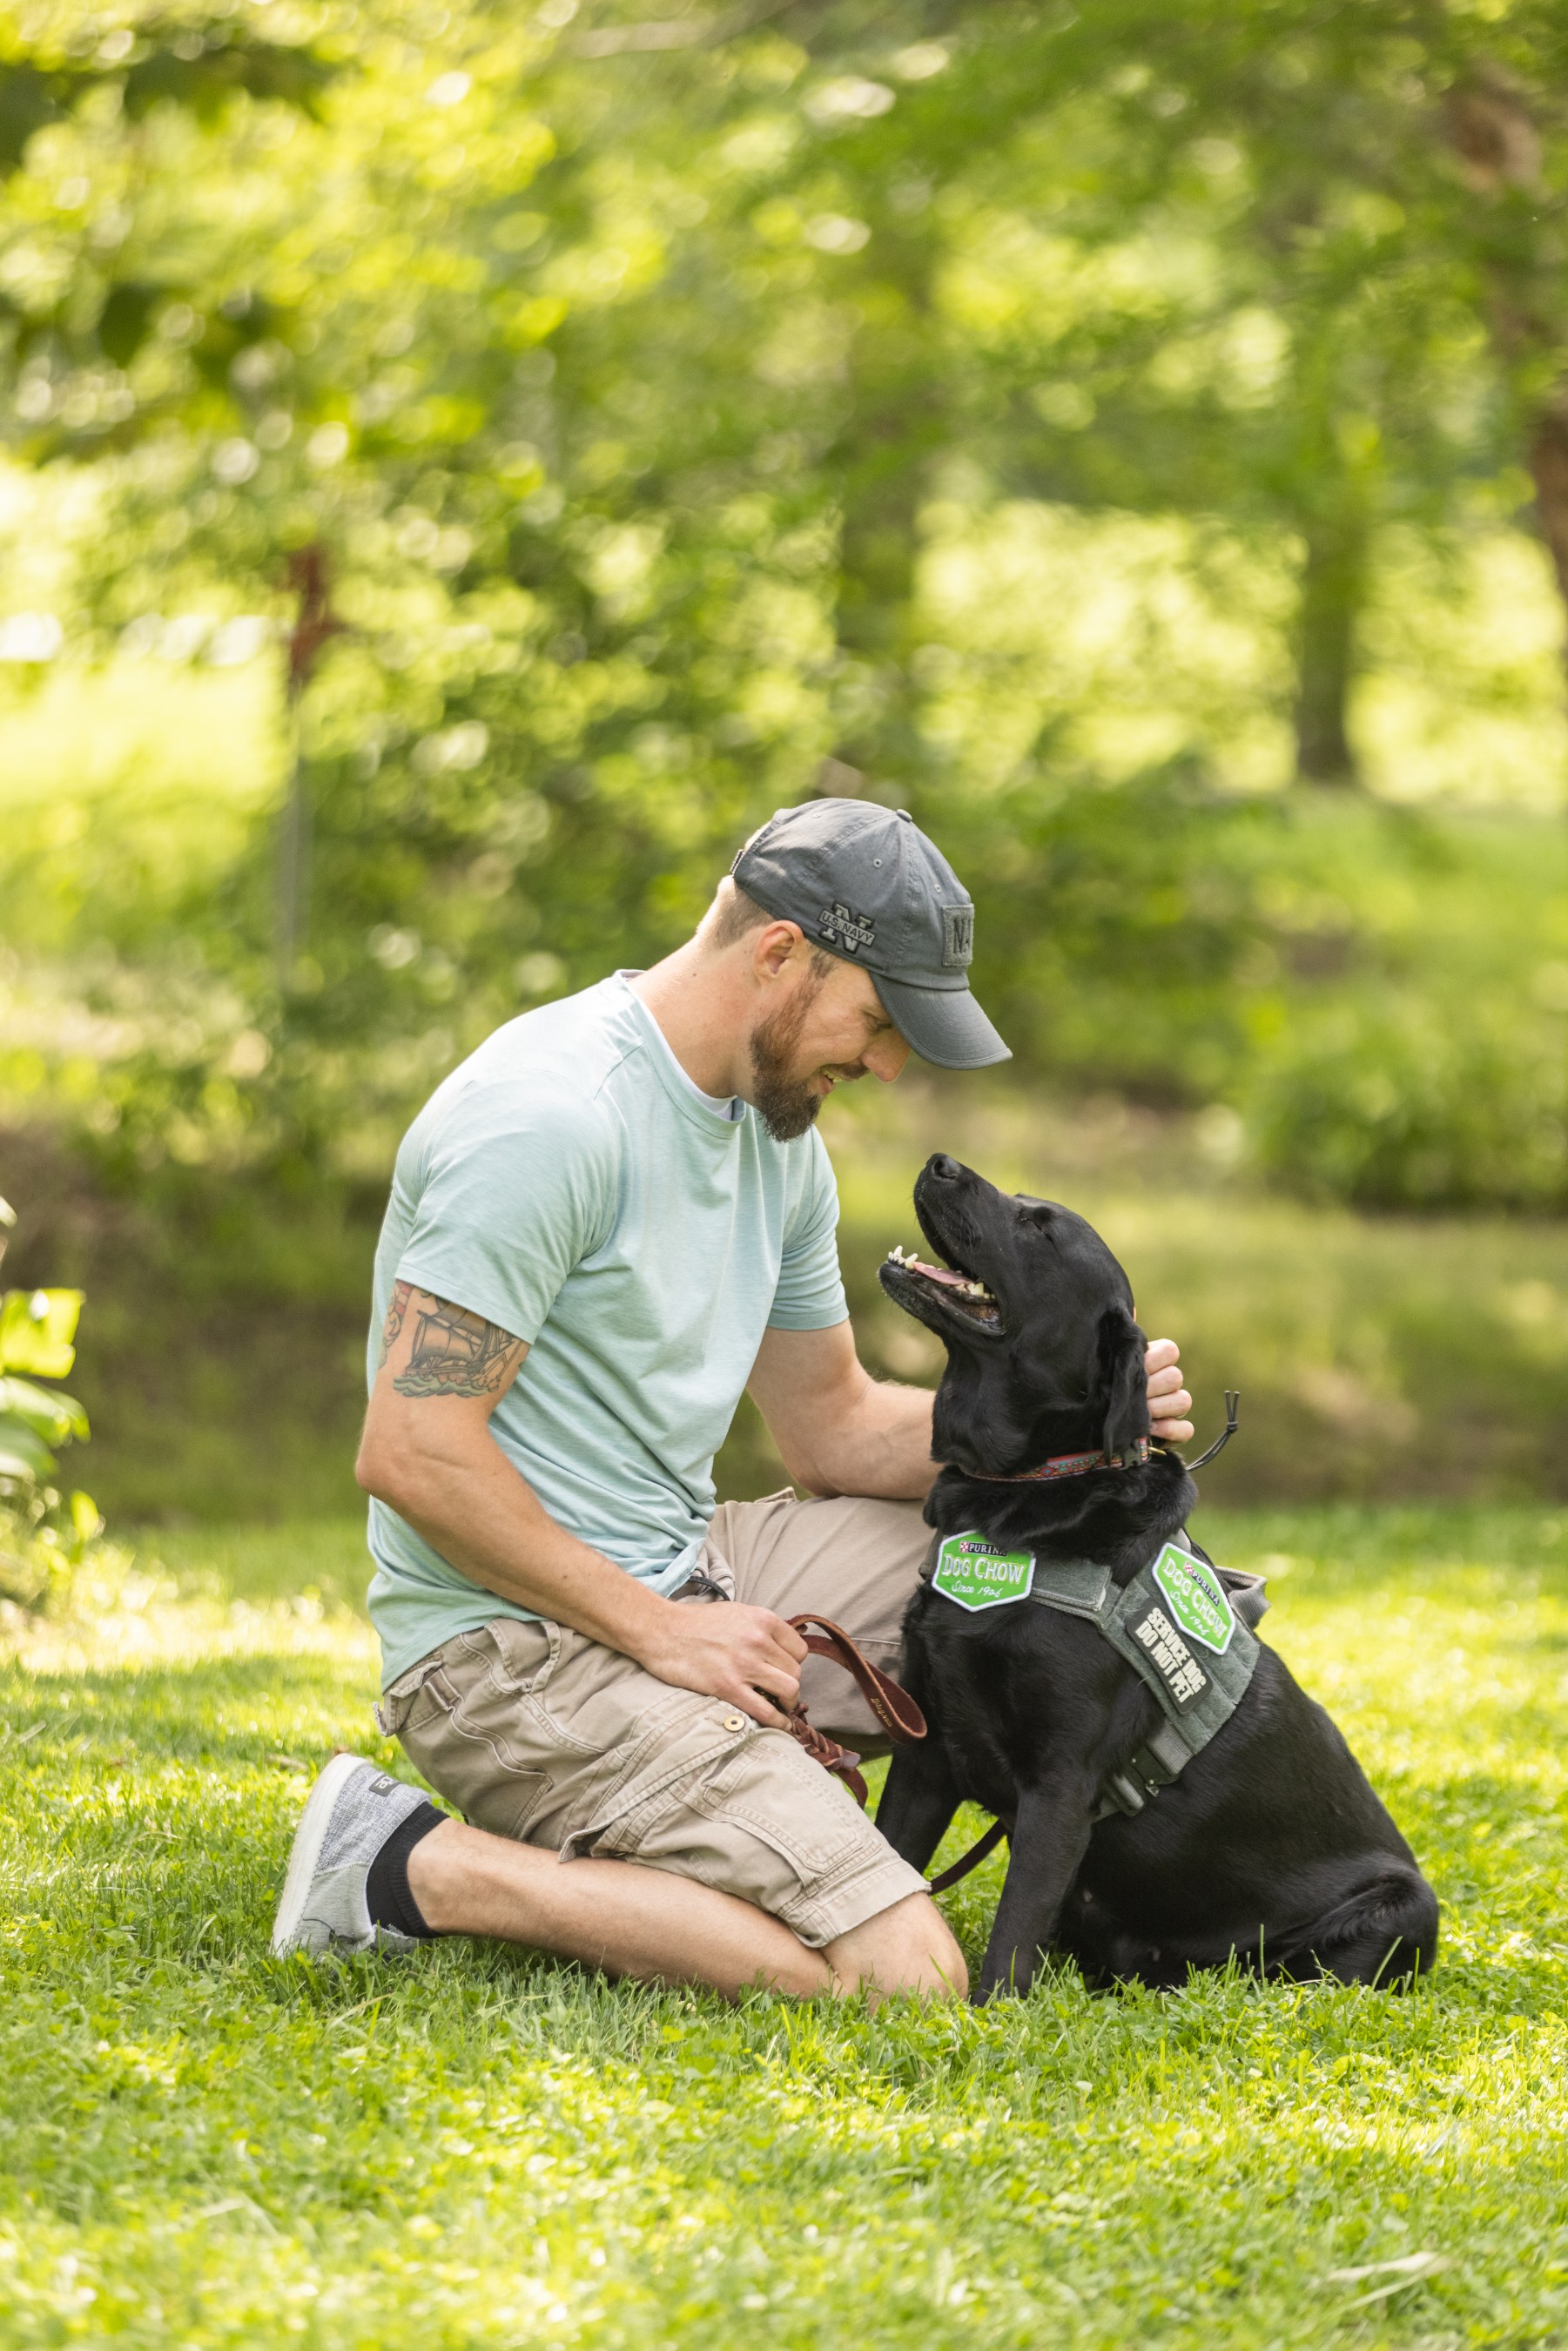 Military veteran Andy and his service dog Thanos participate in the fourth annual Dog Chow Service Dog Salute campaign